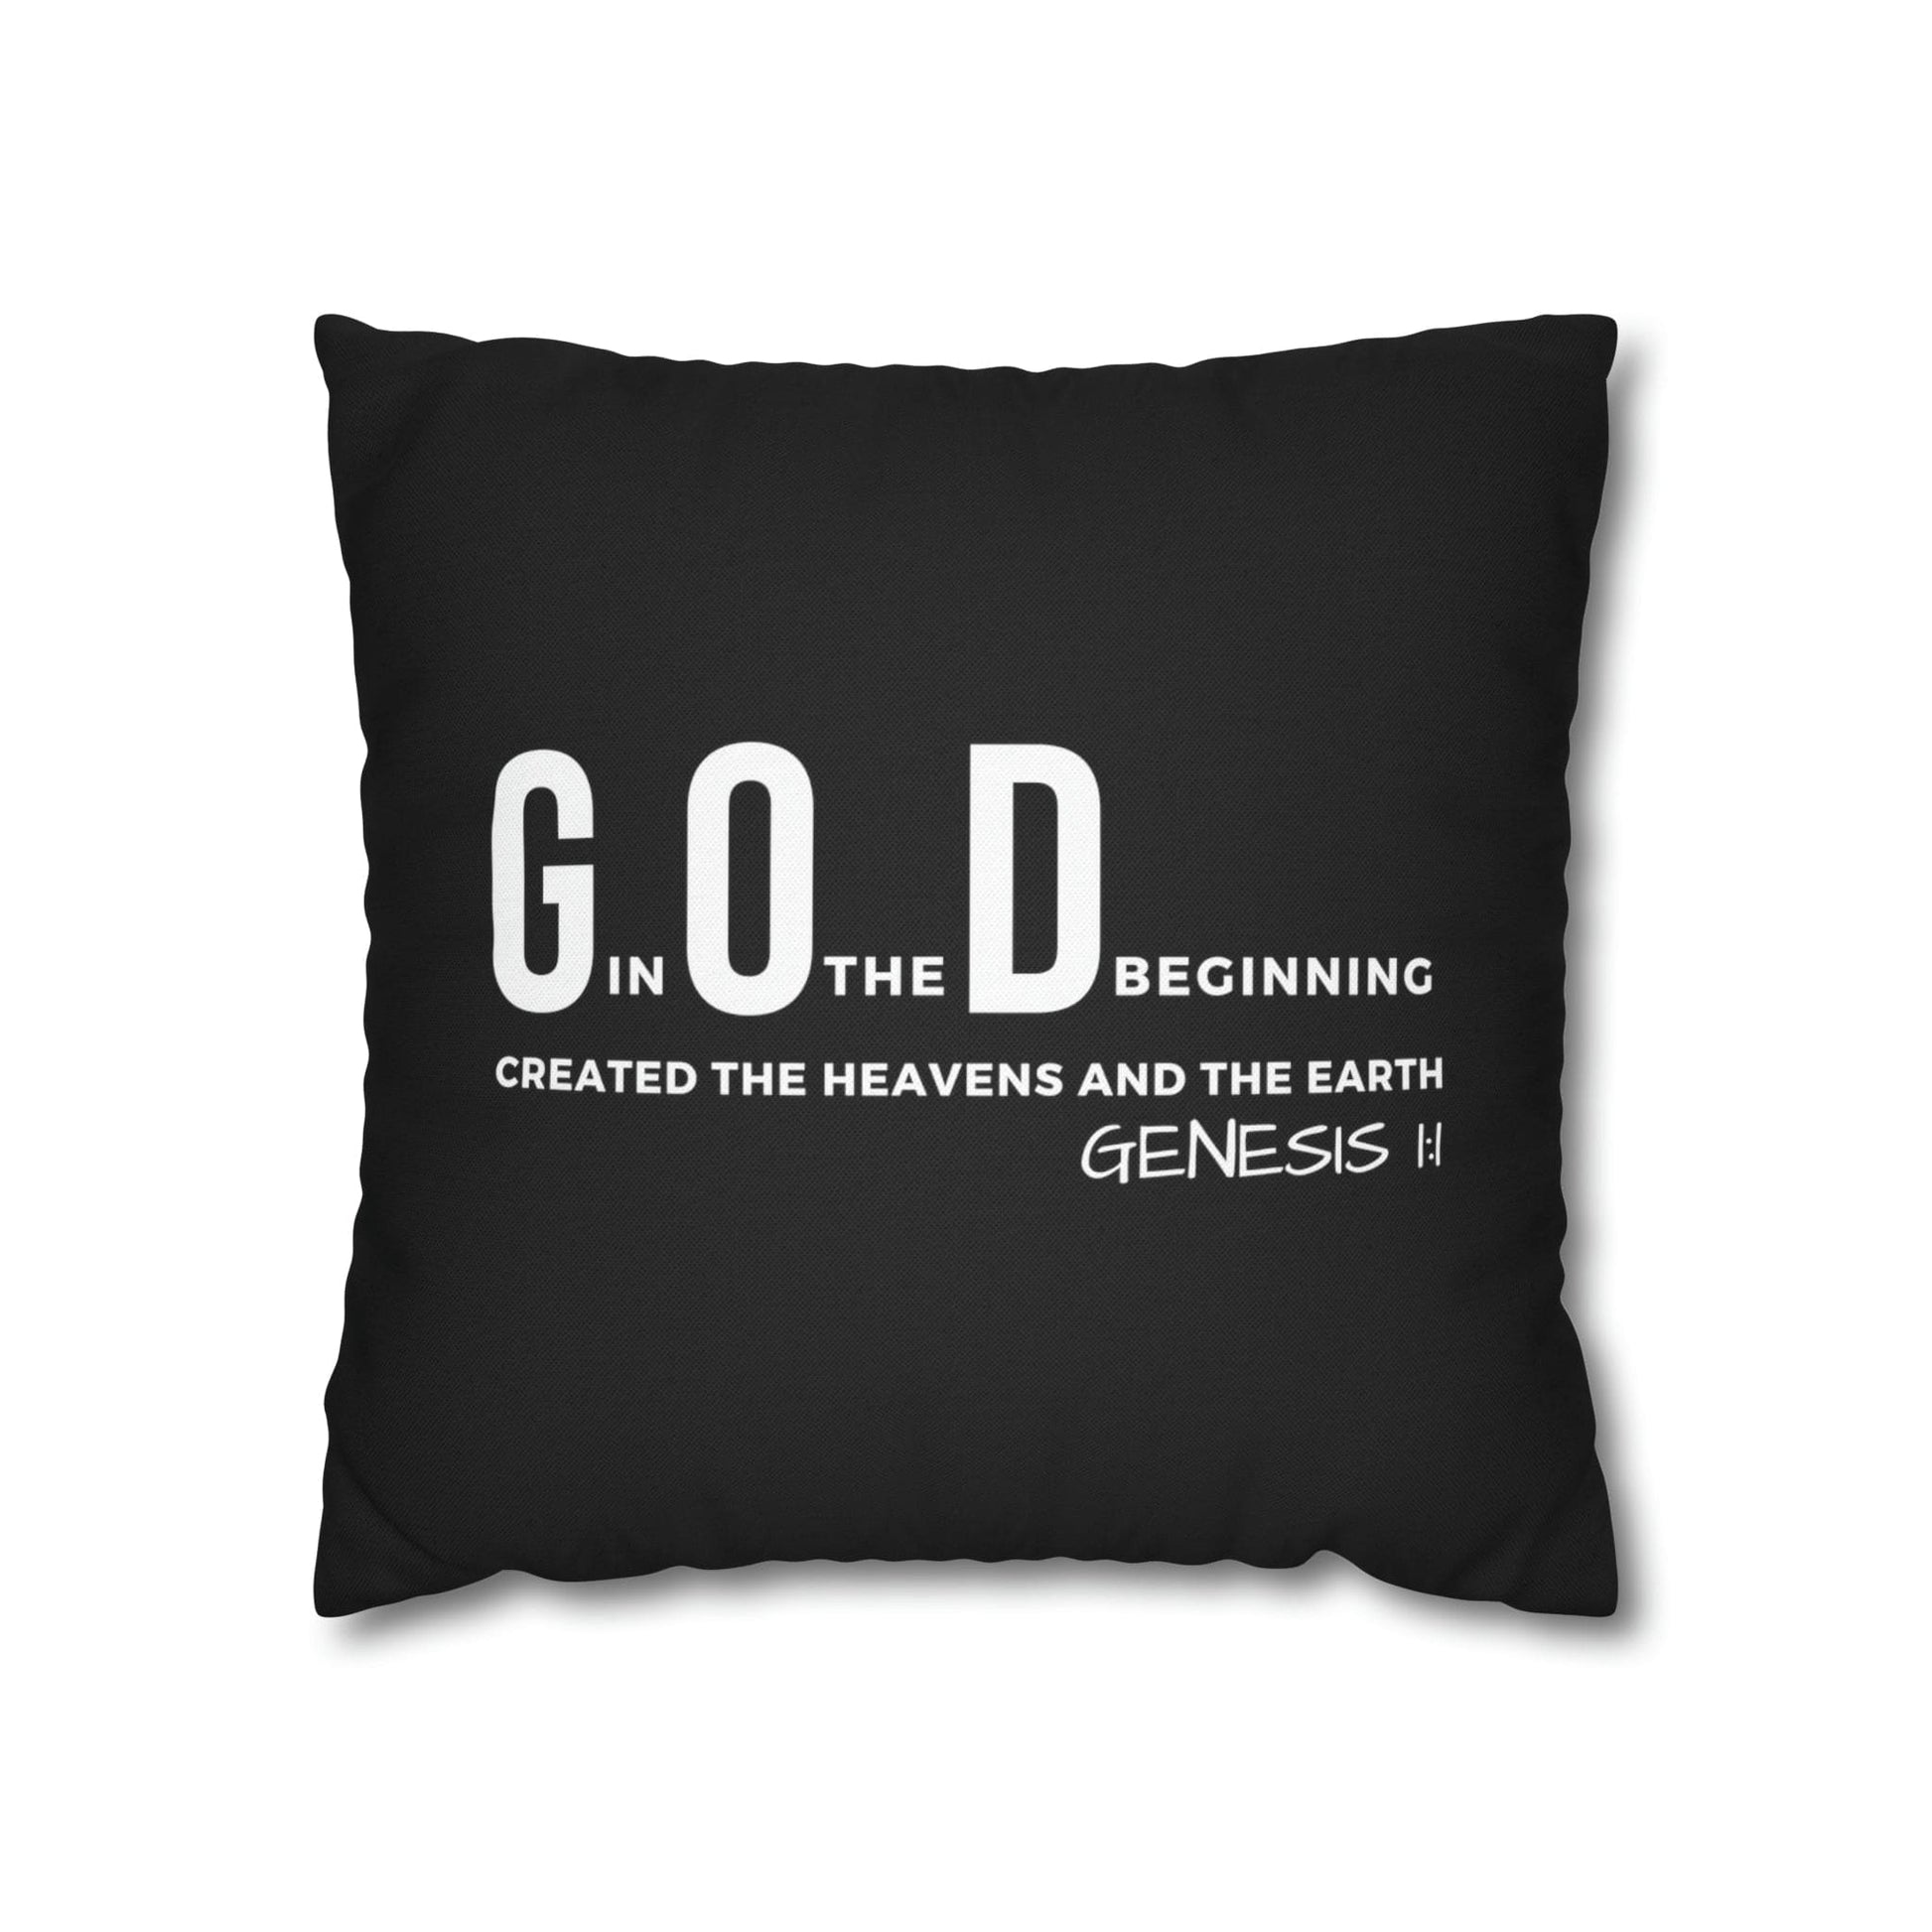 Decorative Throw Pillow Cover - Set Of 2, God In The Beginning Created The Heavens And The Earth - Scripture Verse-2